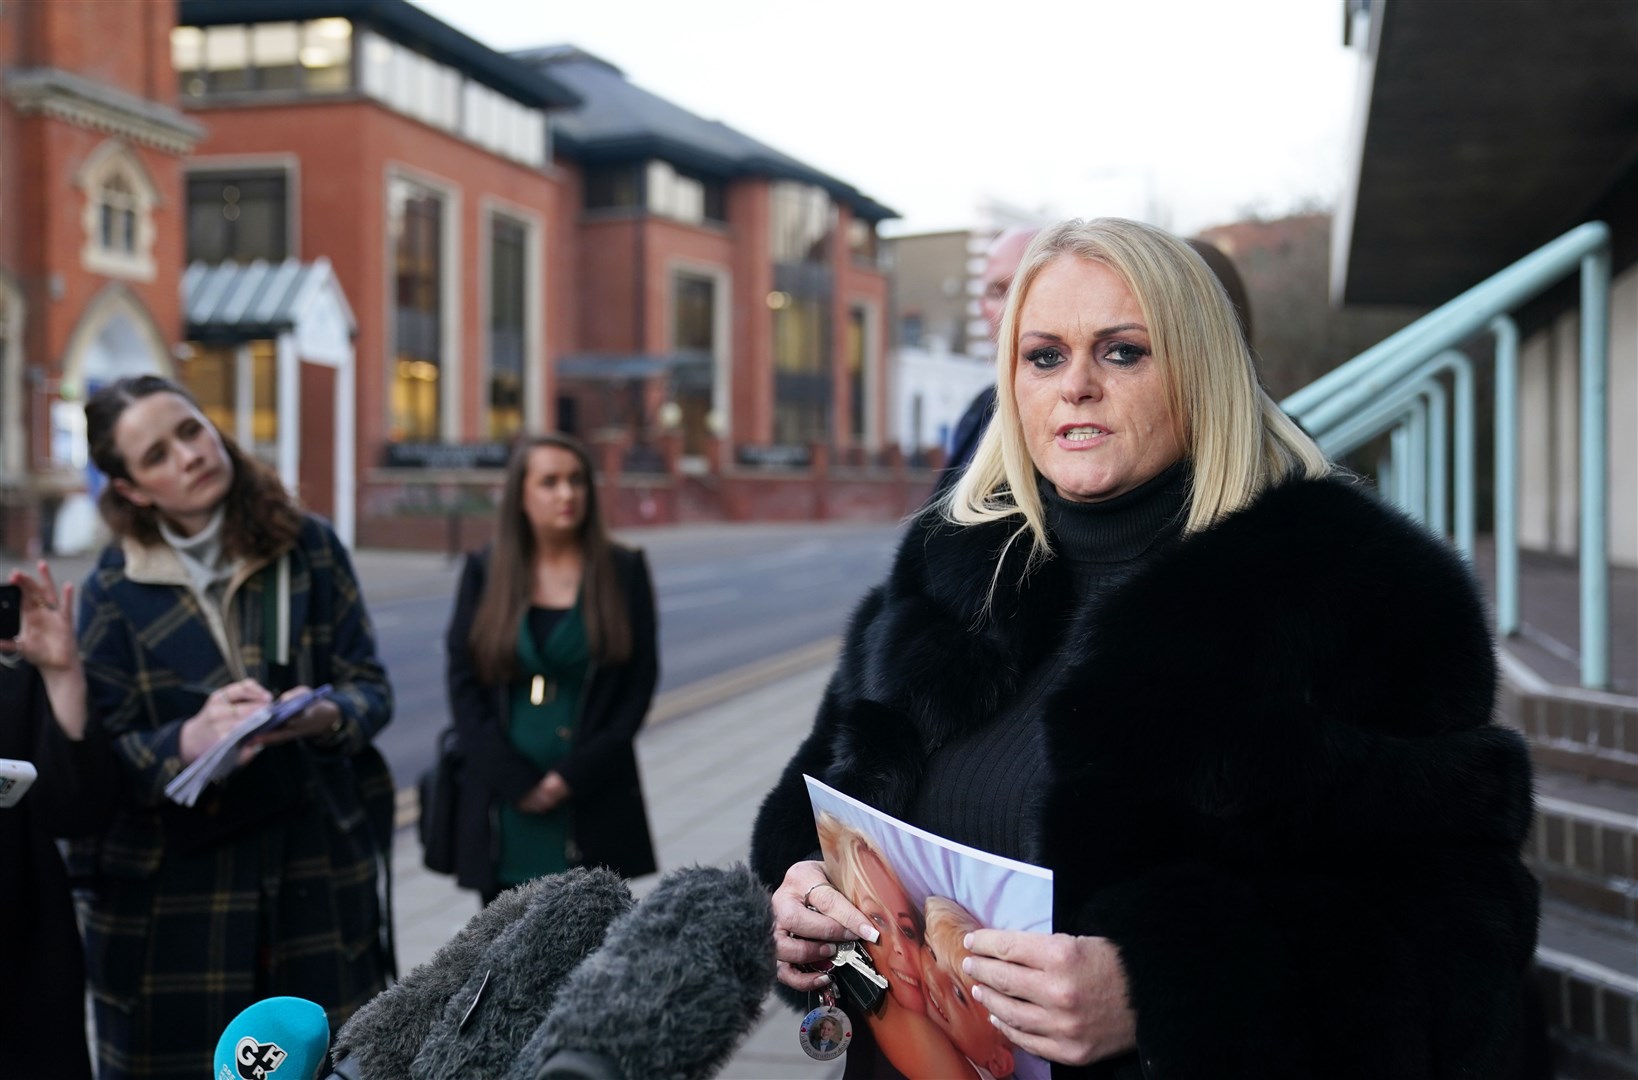 Hollie Dance, the mother of Archie Battersbee, says she is still fighting for ‘justice’ (Joe Giddens/PA)